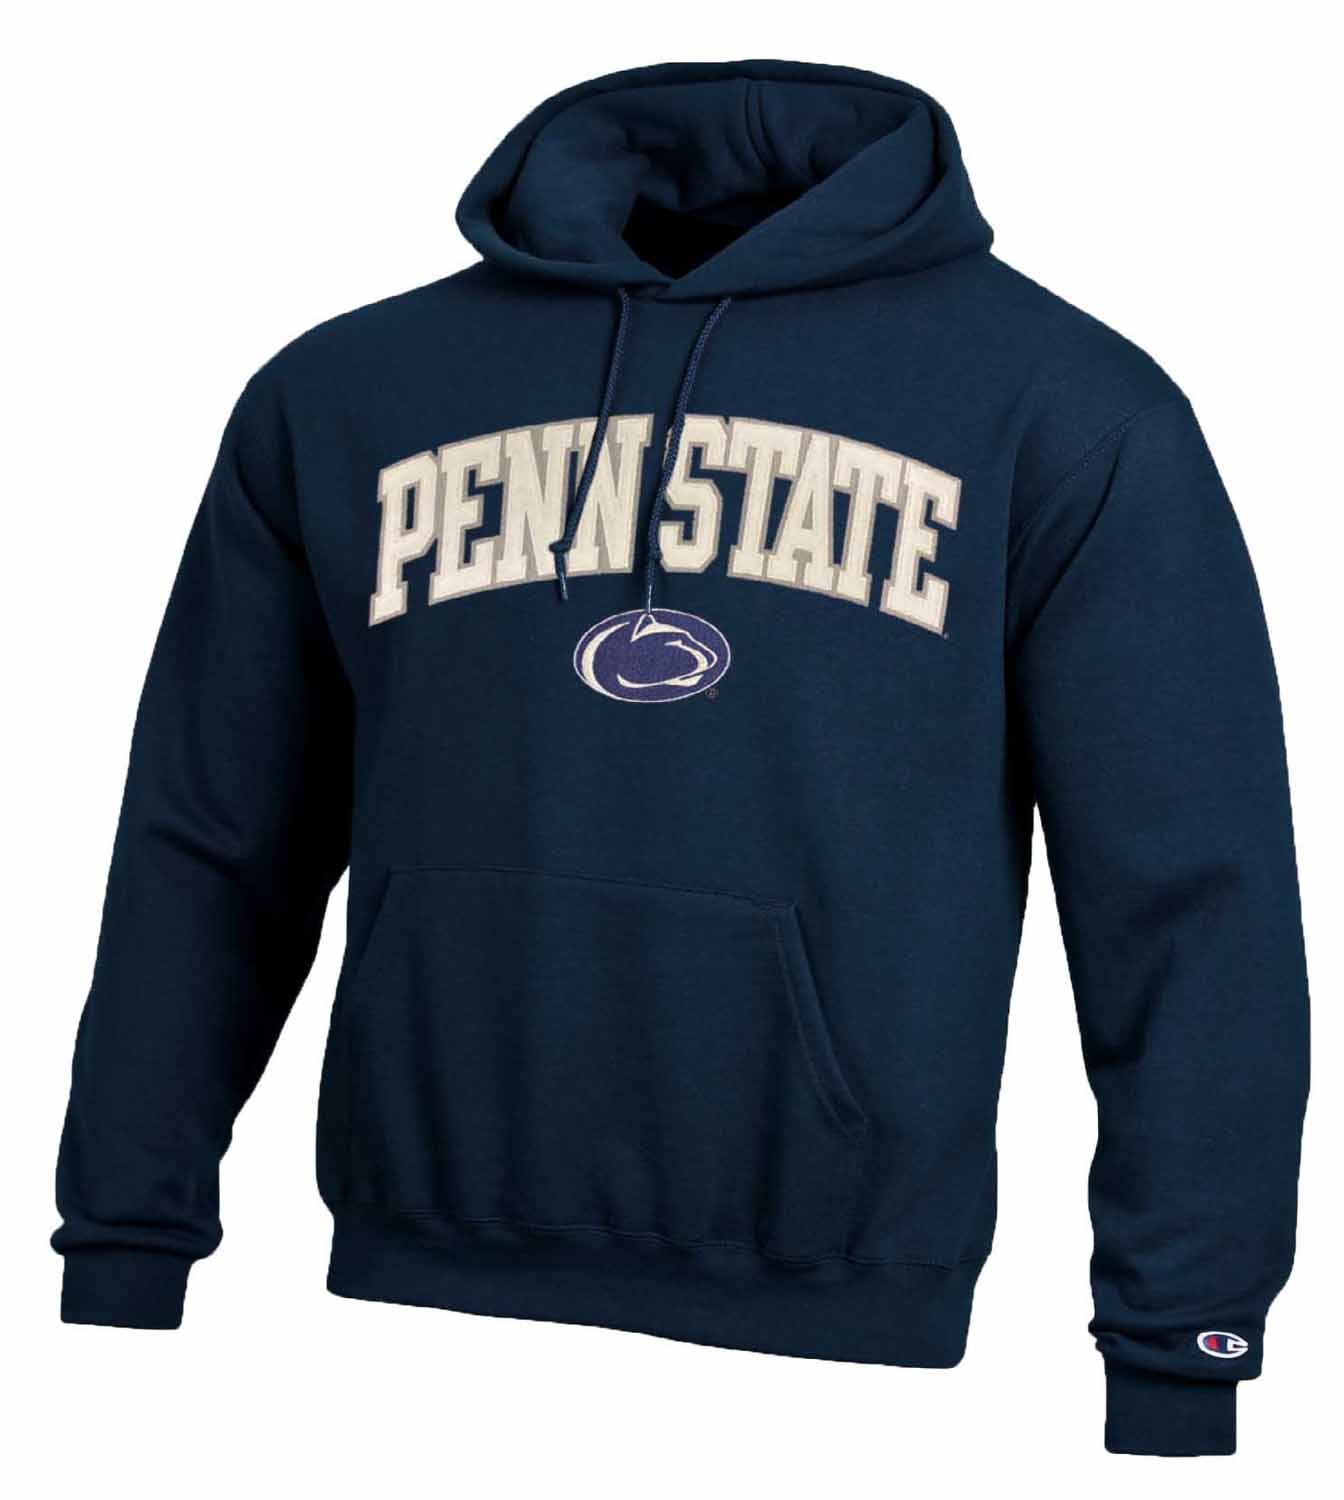 Penn State Nittany Lions Champion Adult Tackle Twill Hooded Sweatshirt - Navy